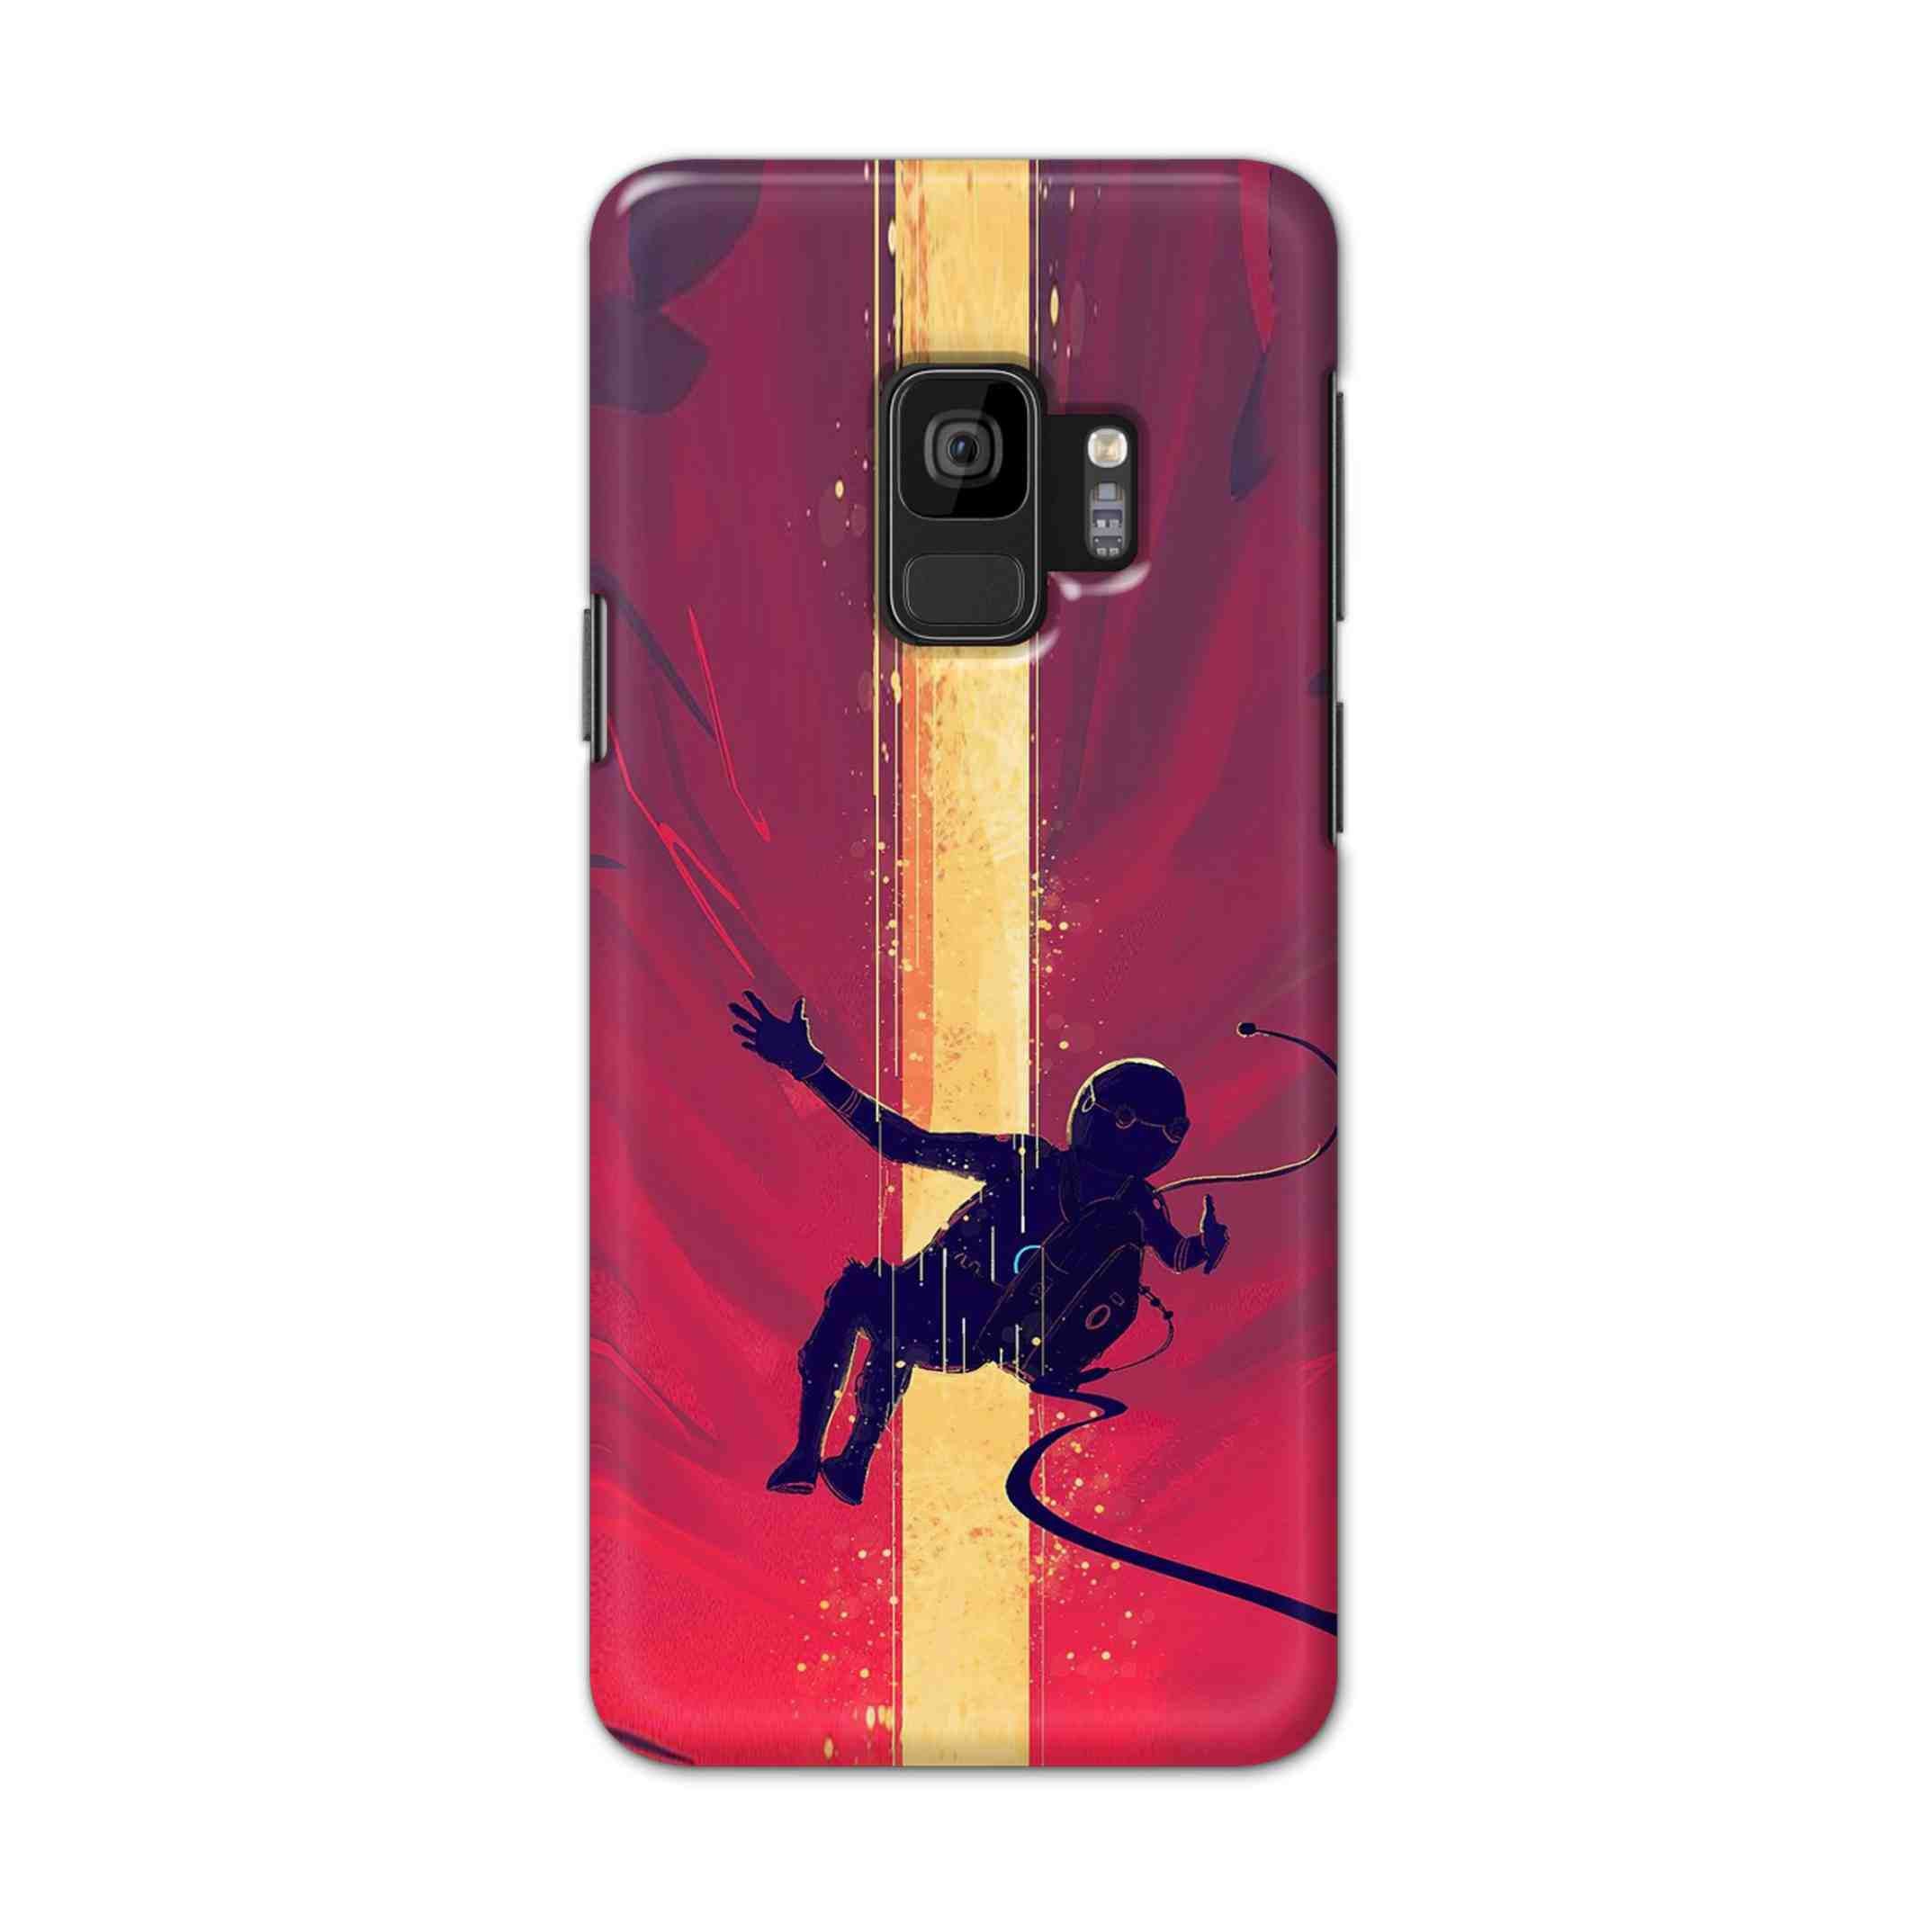 Buy Astronaut In Air Hard Back Mobile Phone Case Cover For Samsung S9 Online